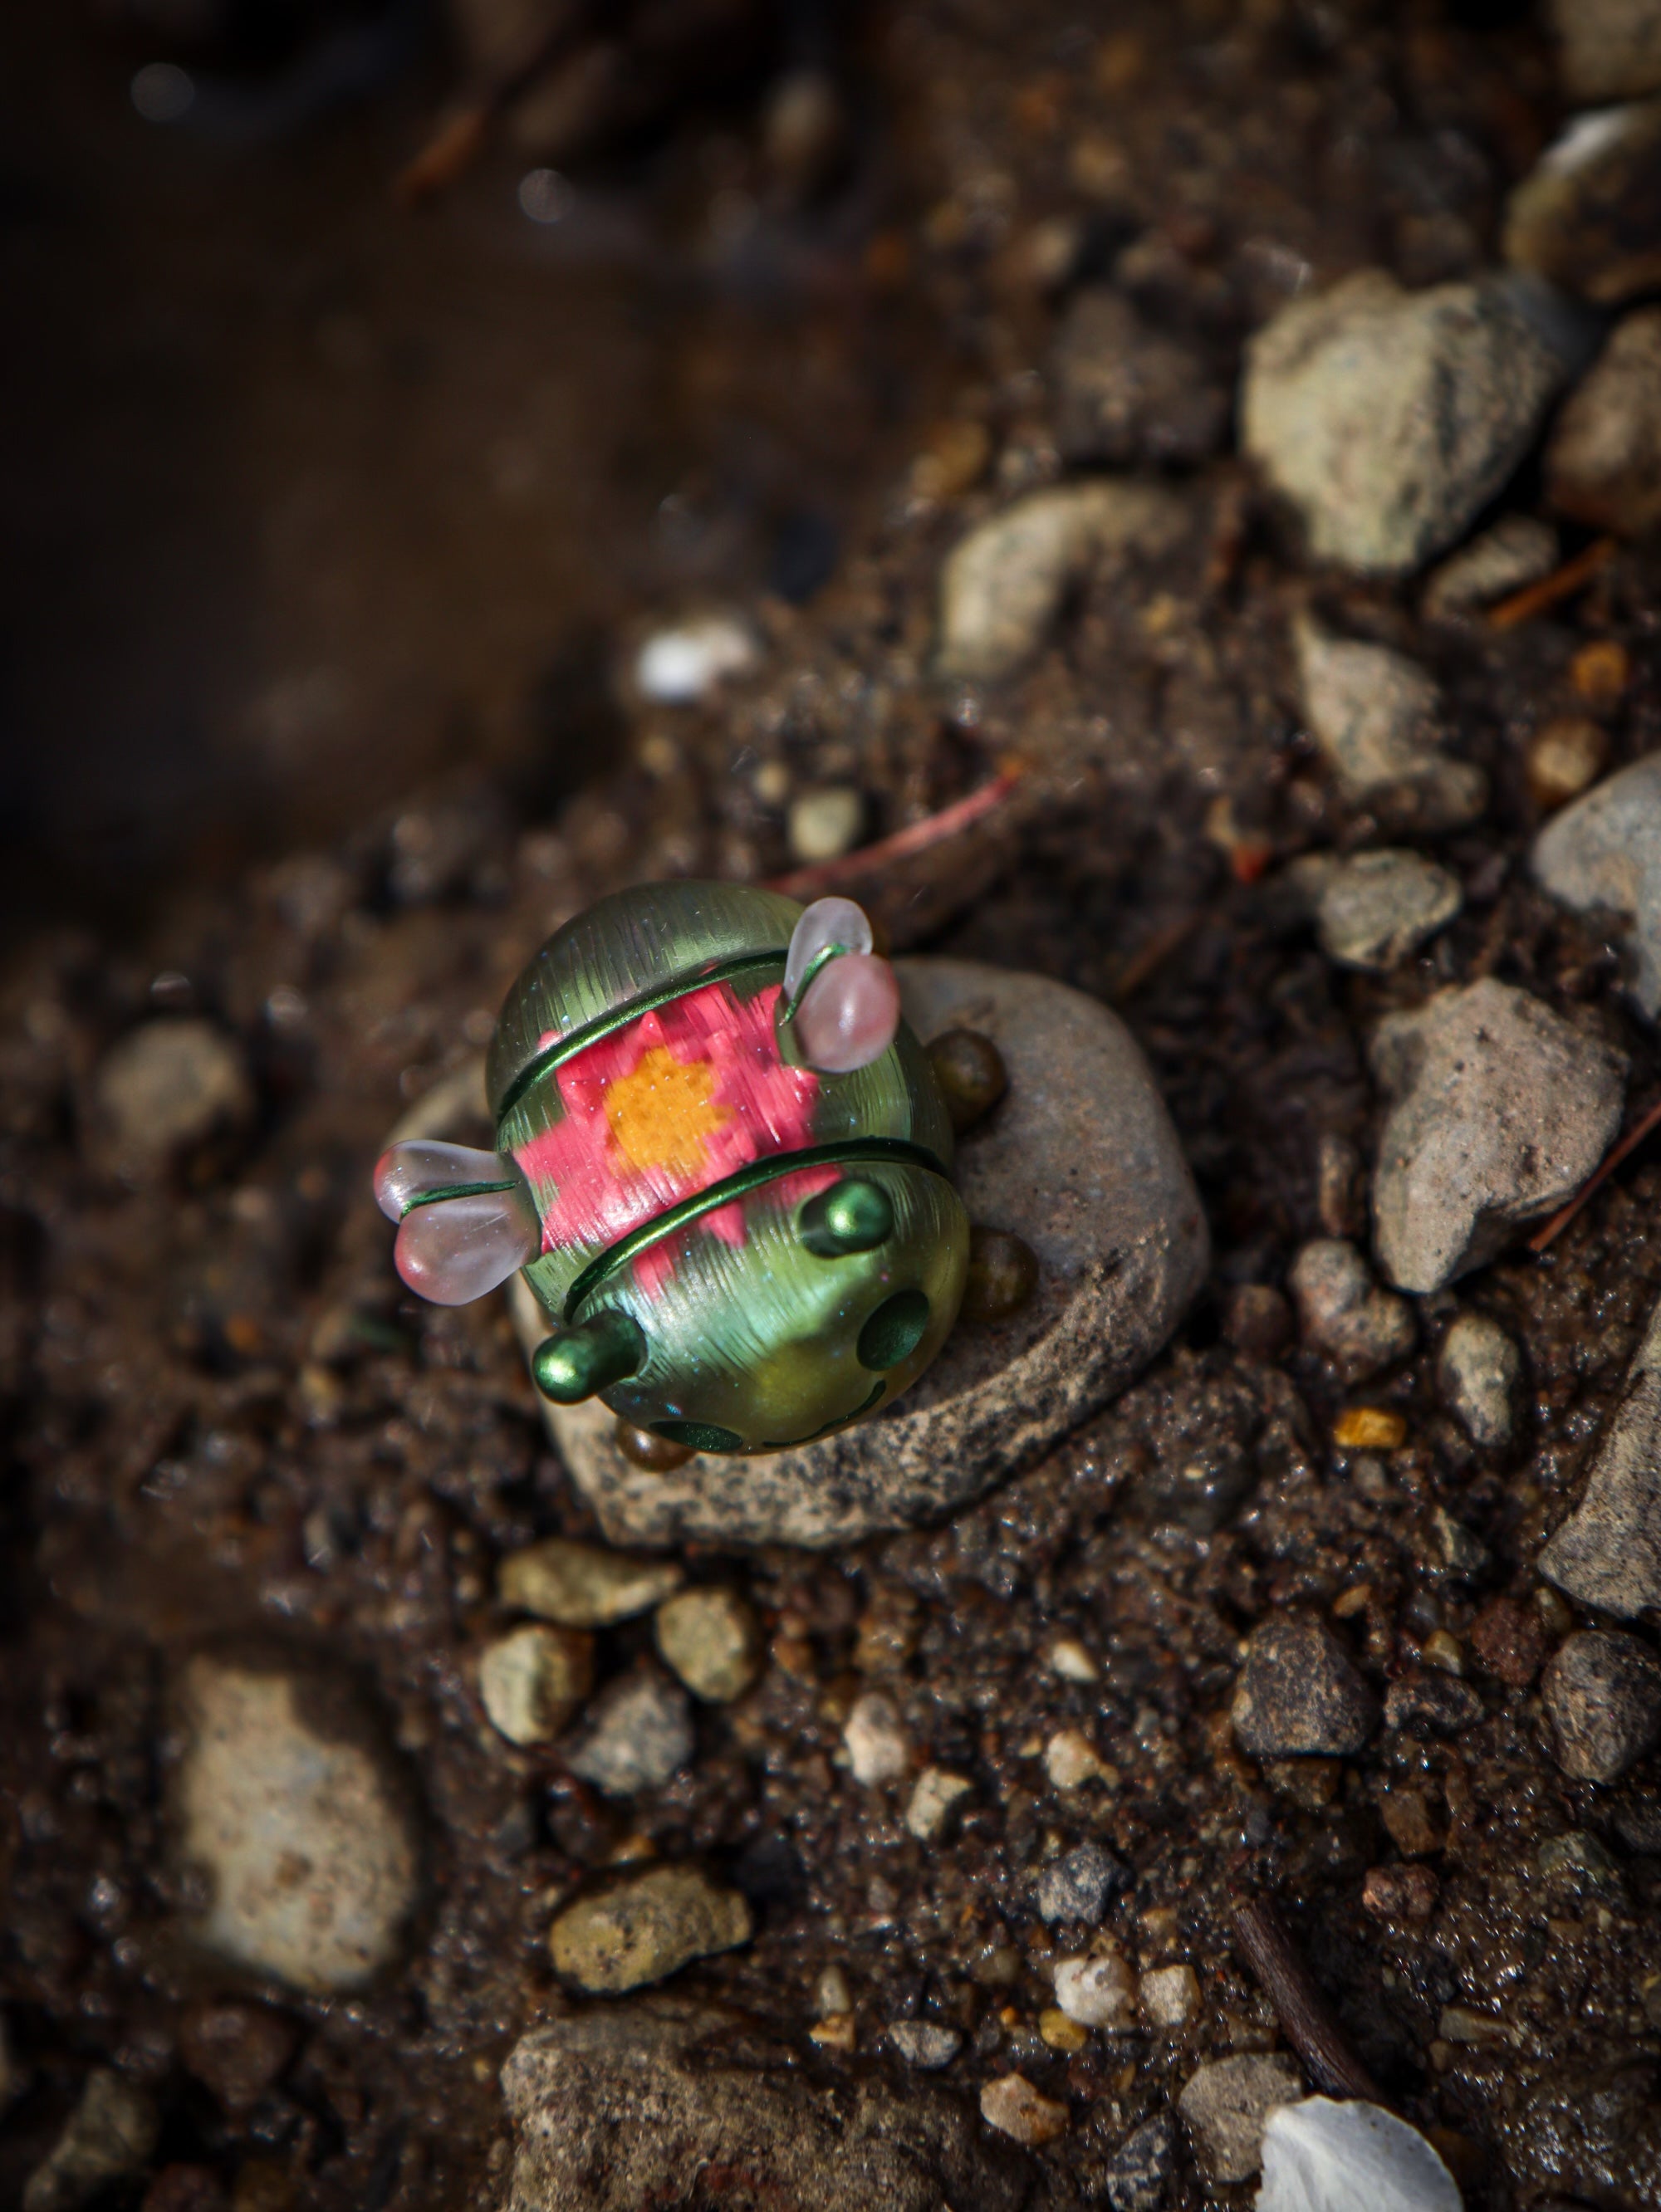 A small green and pink beetle toy on a rock, part of the Octopus Cube collection by Fairies And Fancies at Strangecat Toys. Made of Polymer Clay and Resin.